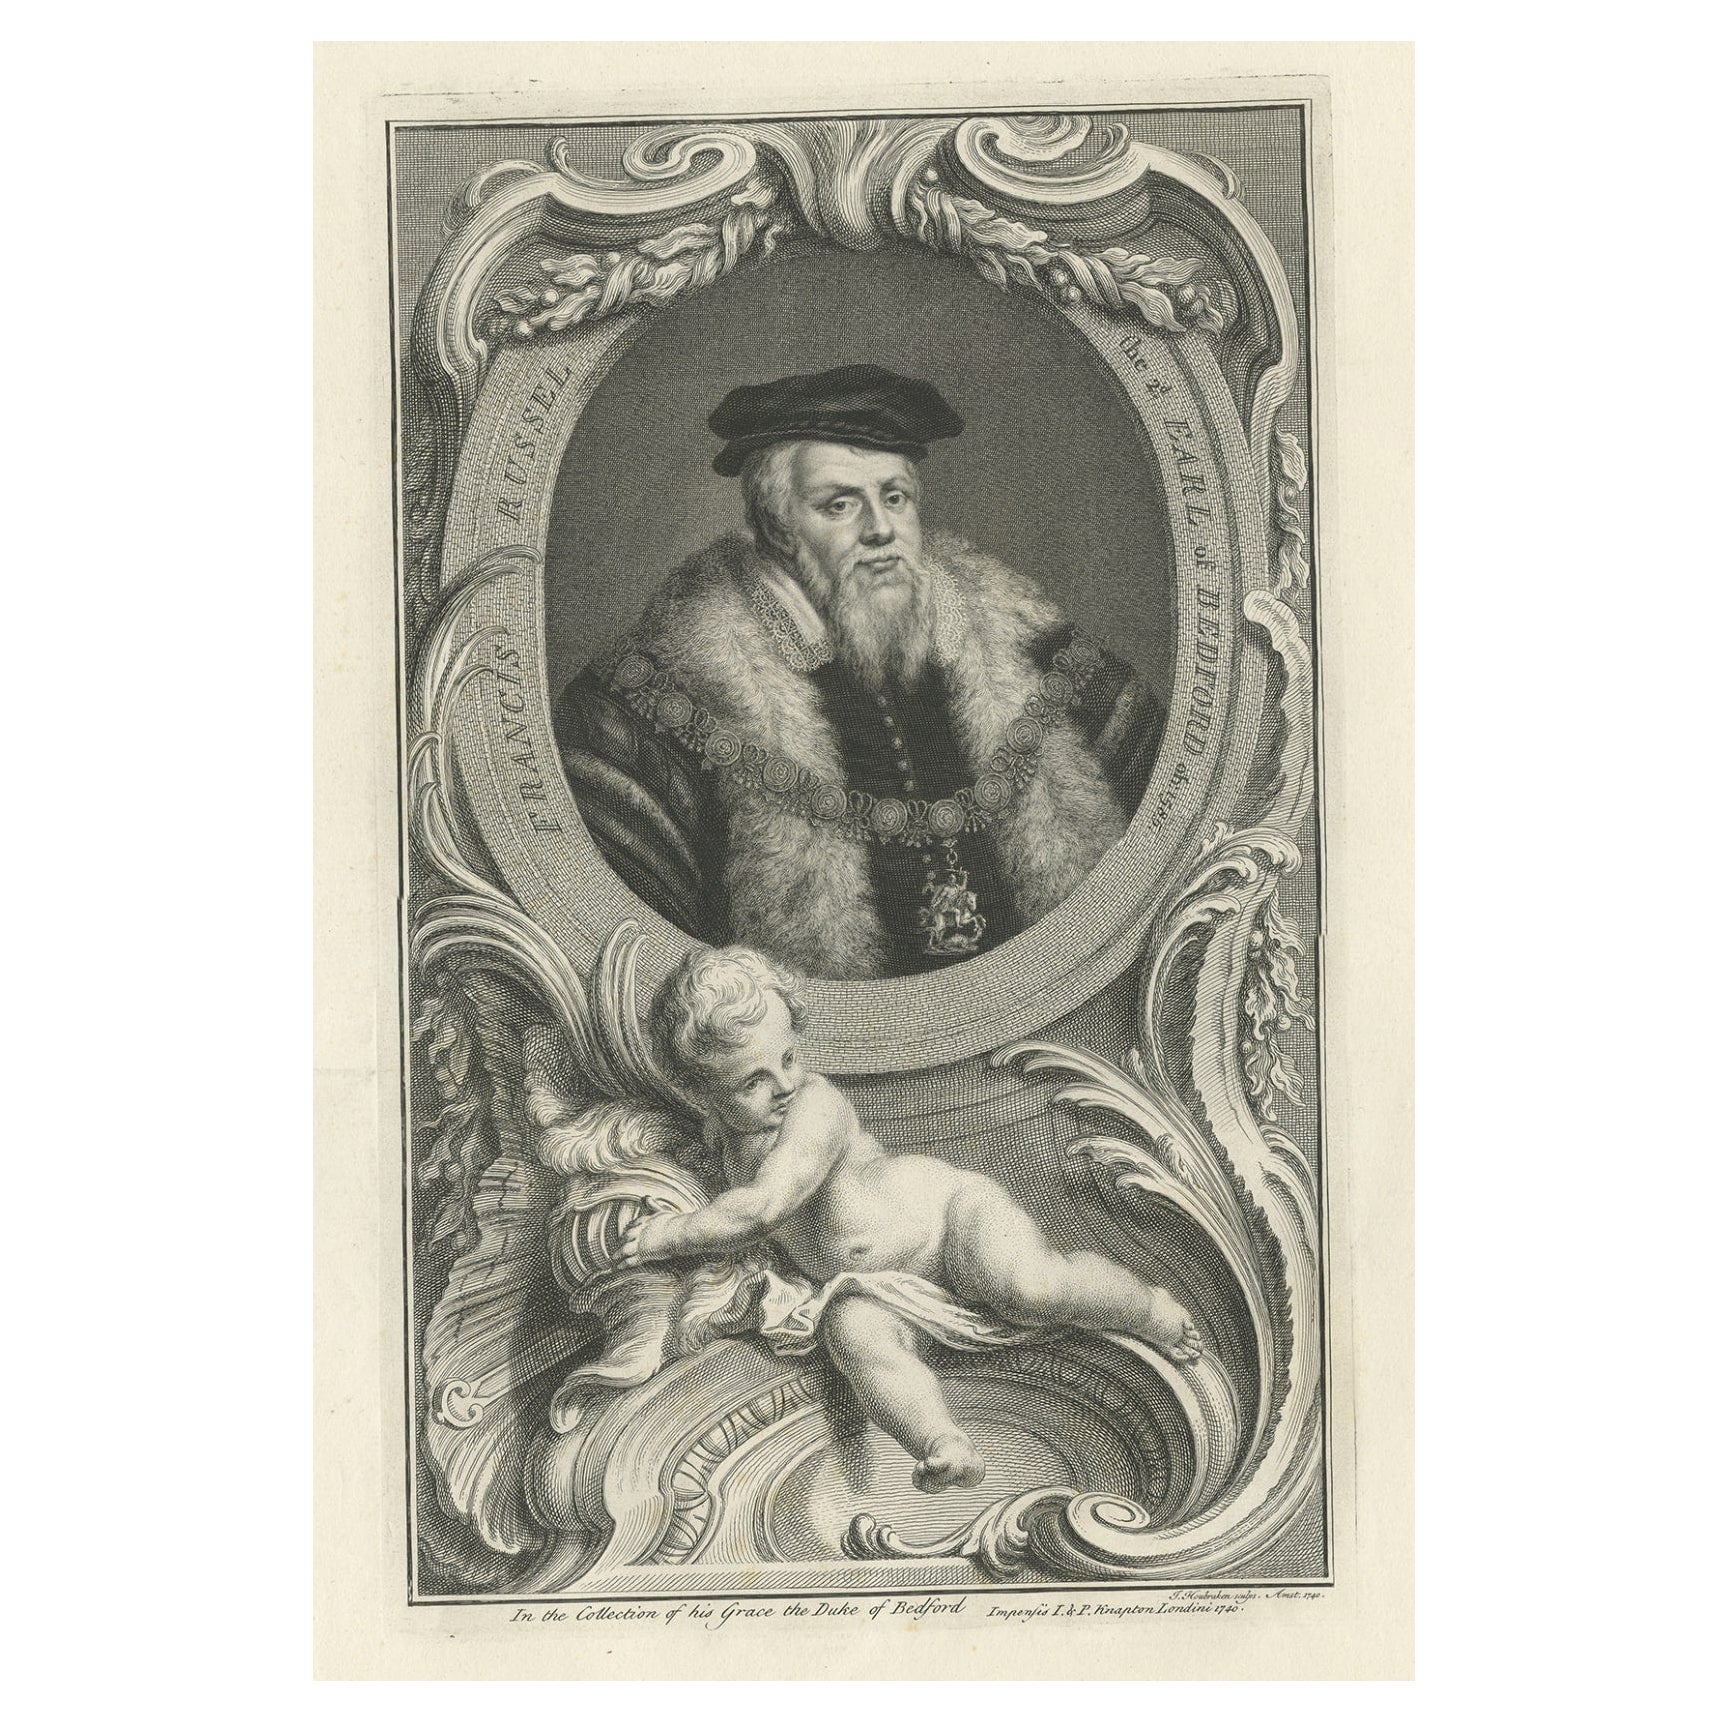 Portrait of Francis Russell, Earl of Bedford, English Nobleman and Politician